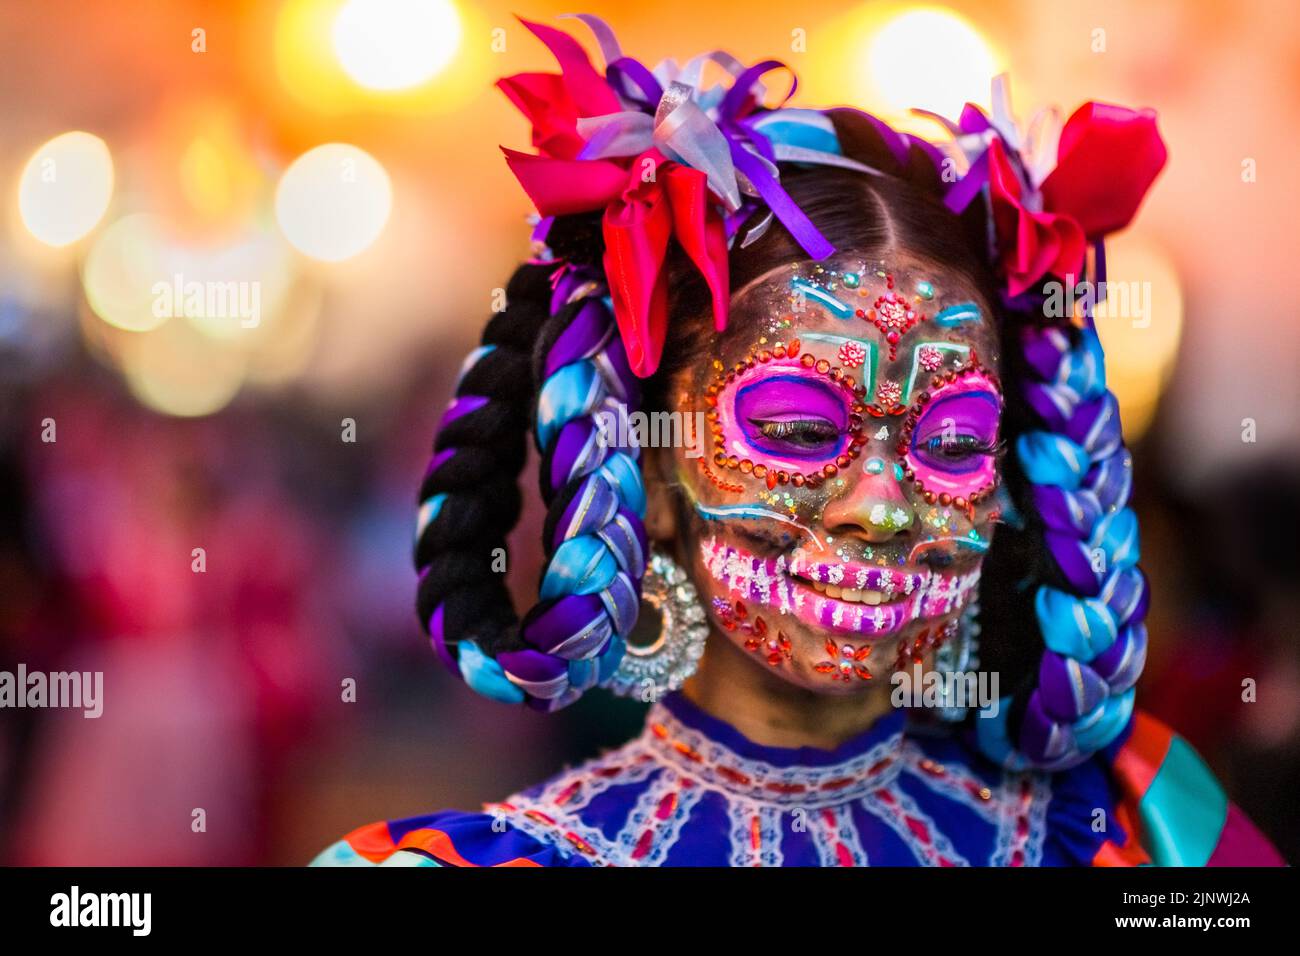 A Mexican girl, dressed as La Catrina, a Mexican pop culture icon, takes part in the Day of the Dead celebrations in Taxco, Mexico. Stock Photo